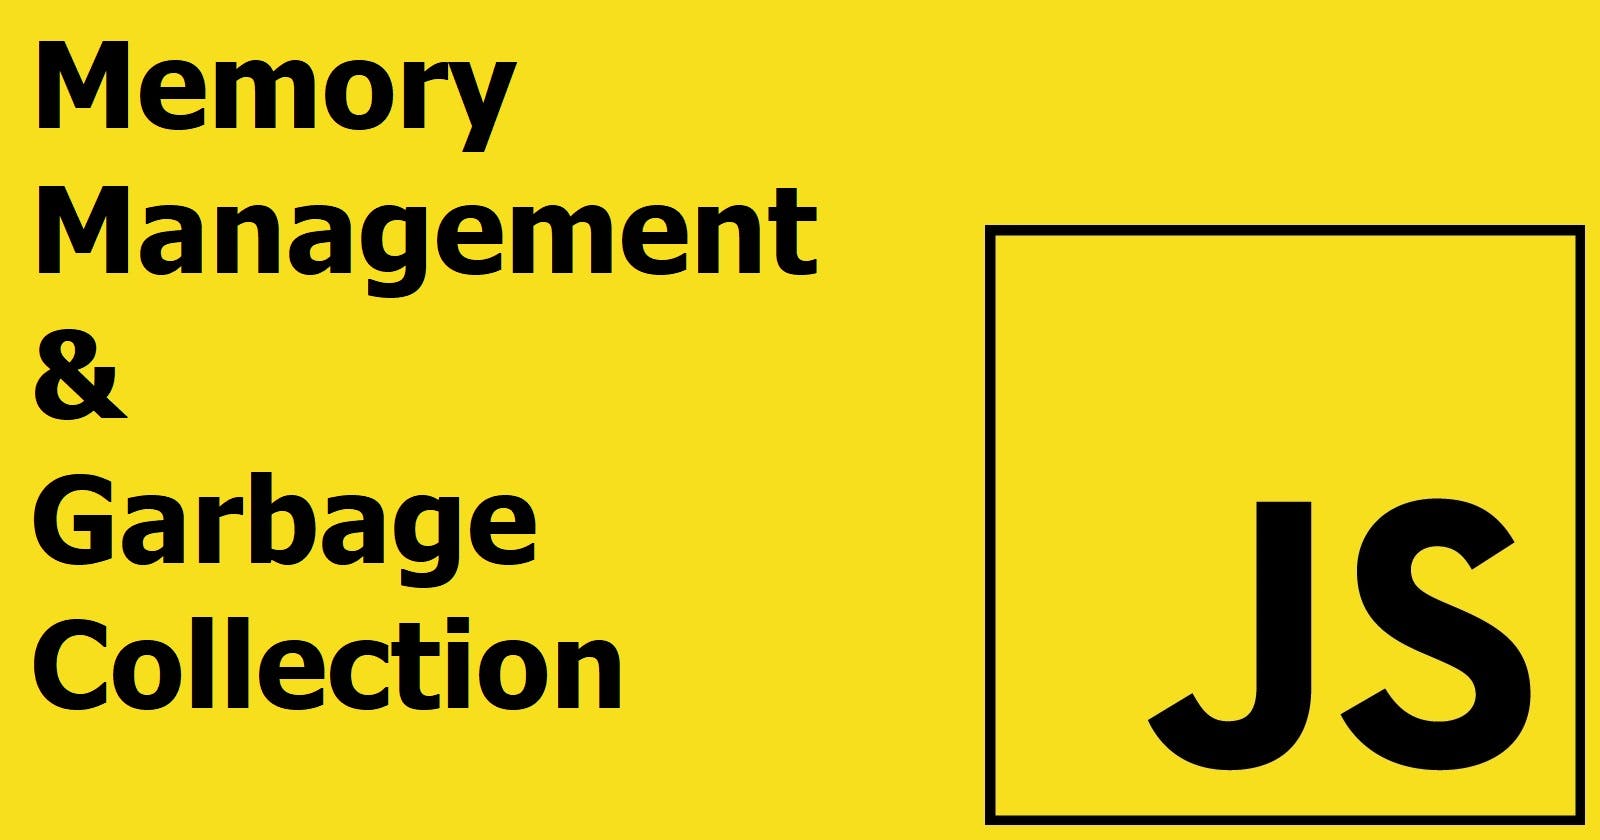 JavaScript Interview Question: 12. Memory Management & Garbage Collection